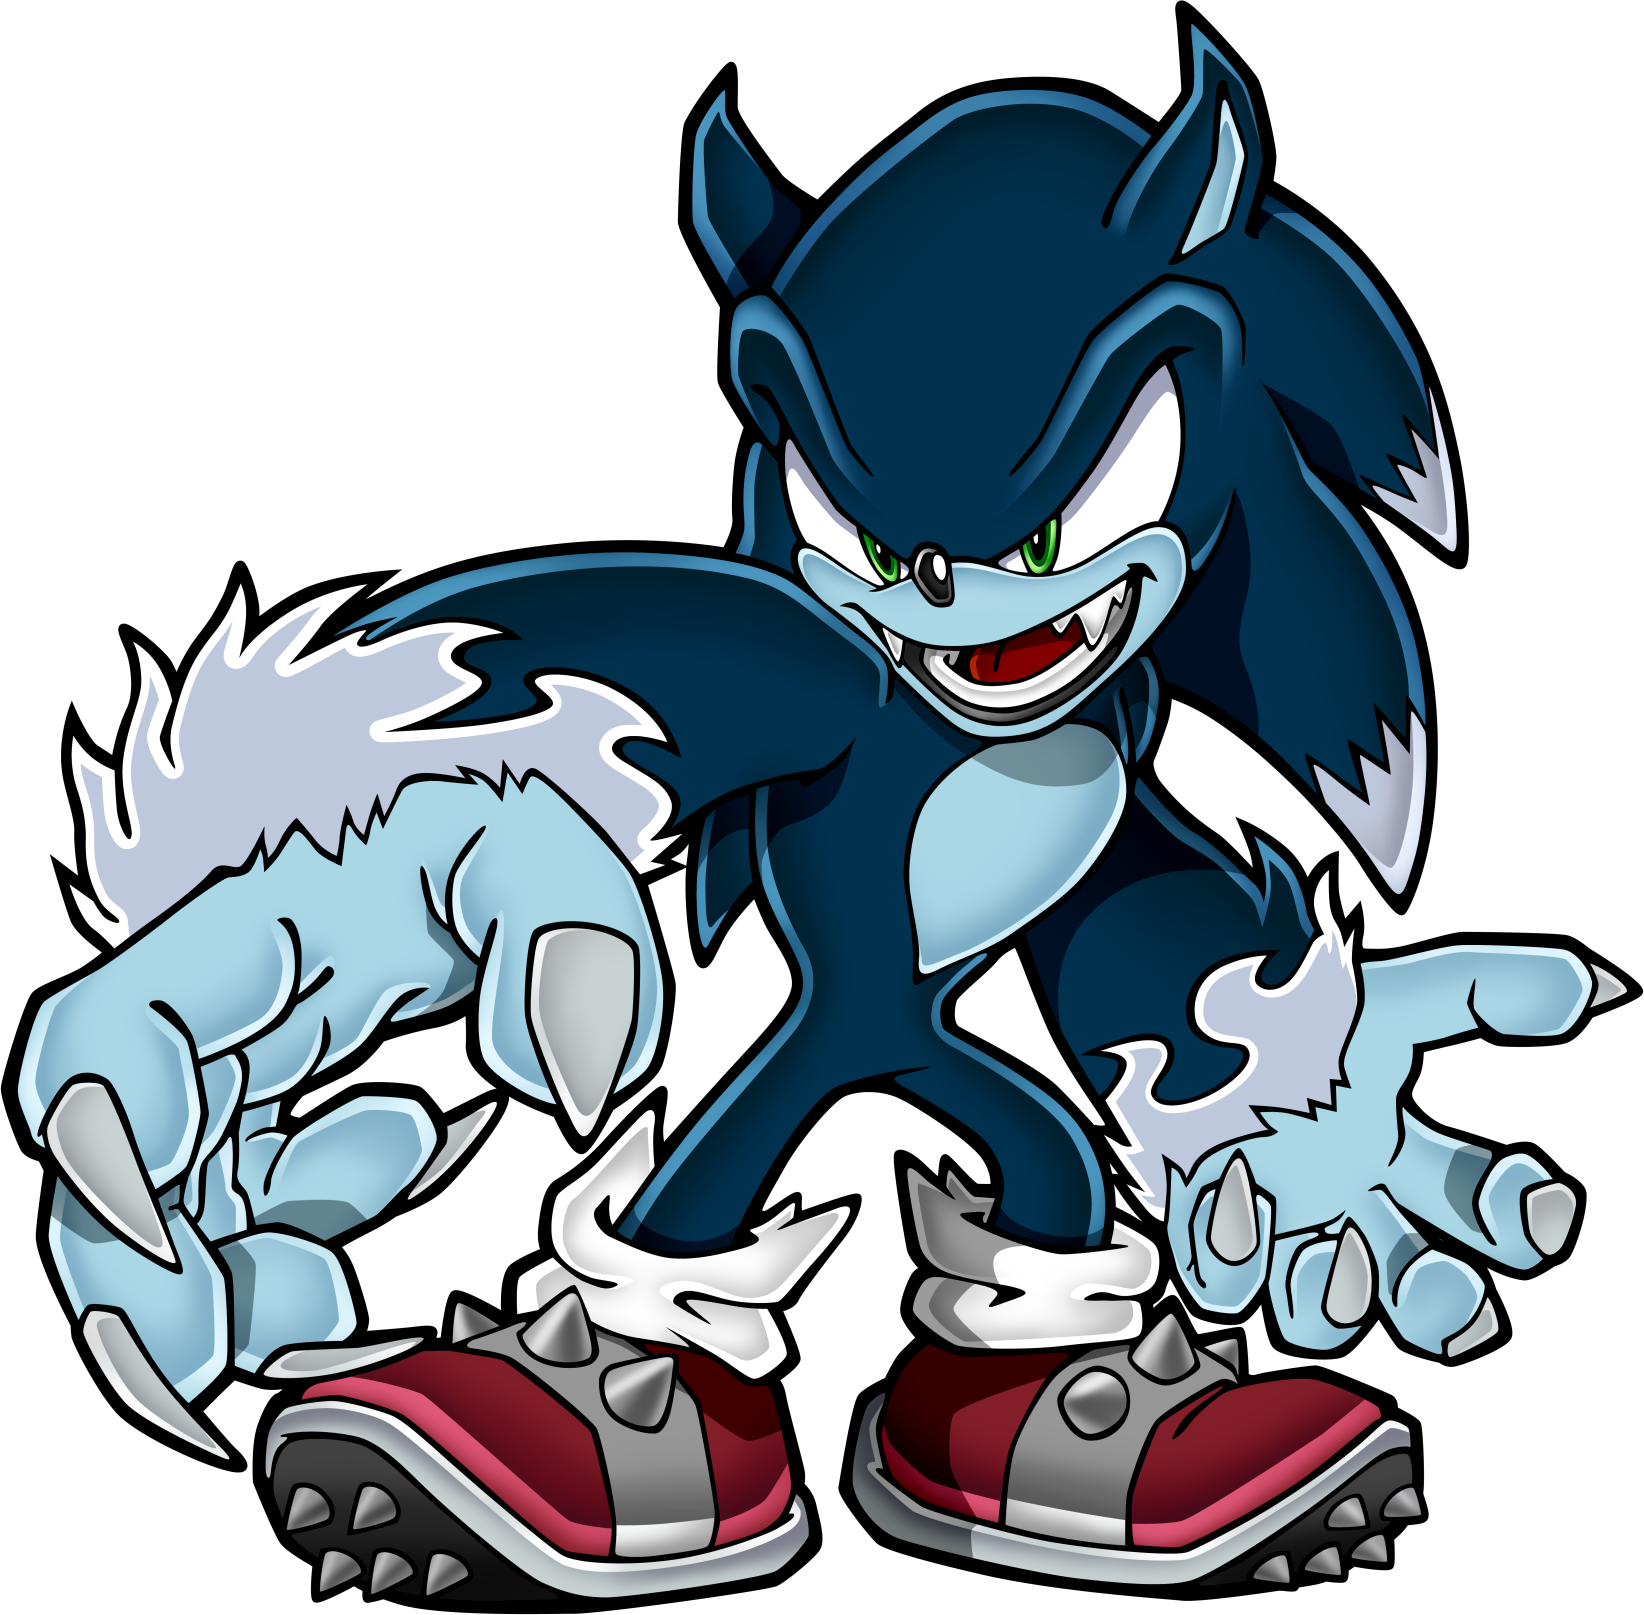 http://vignette1.wikia.nocookie.net/sonic/images/1/1a/Sonic_Art_Assets_DVD_-_Werehog_-_1.png/revision/latest?cb=20101018235154